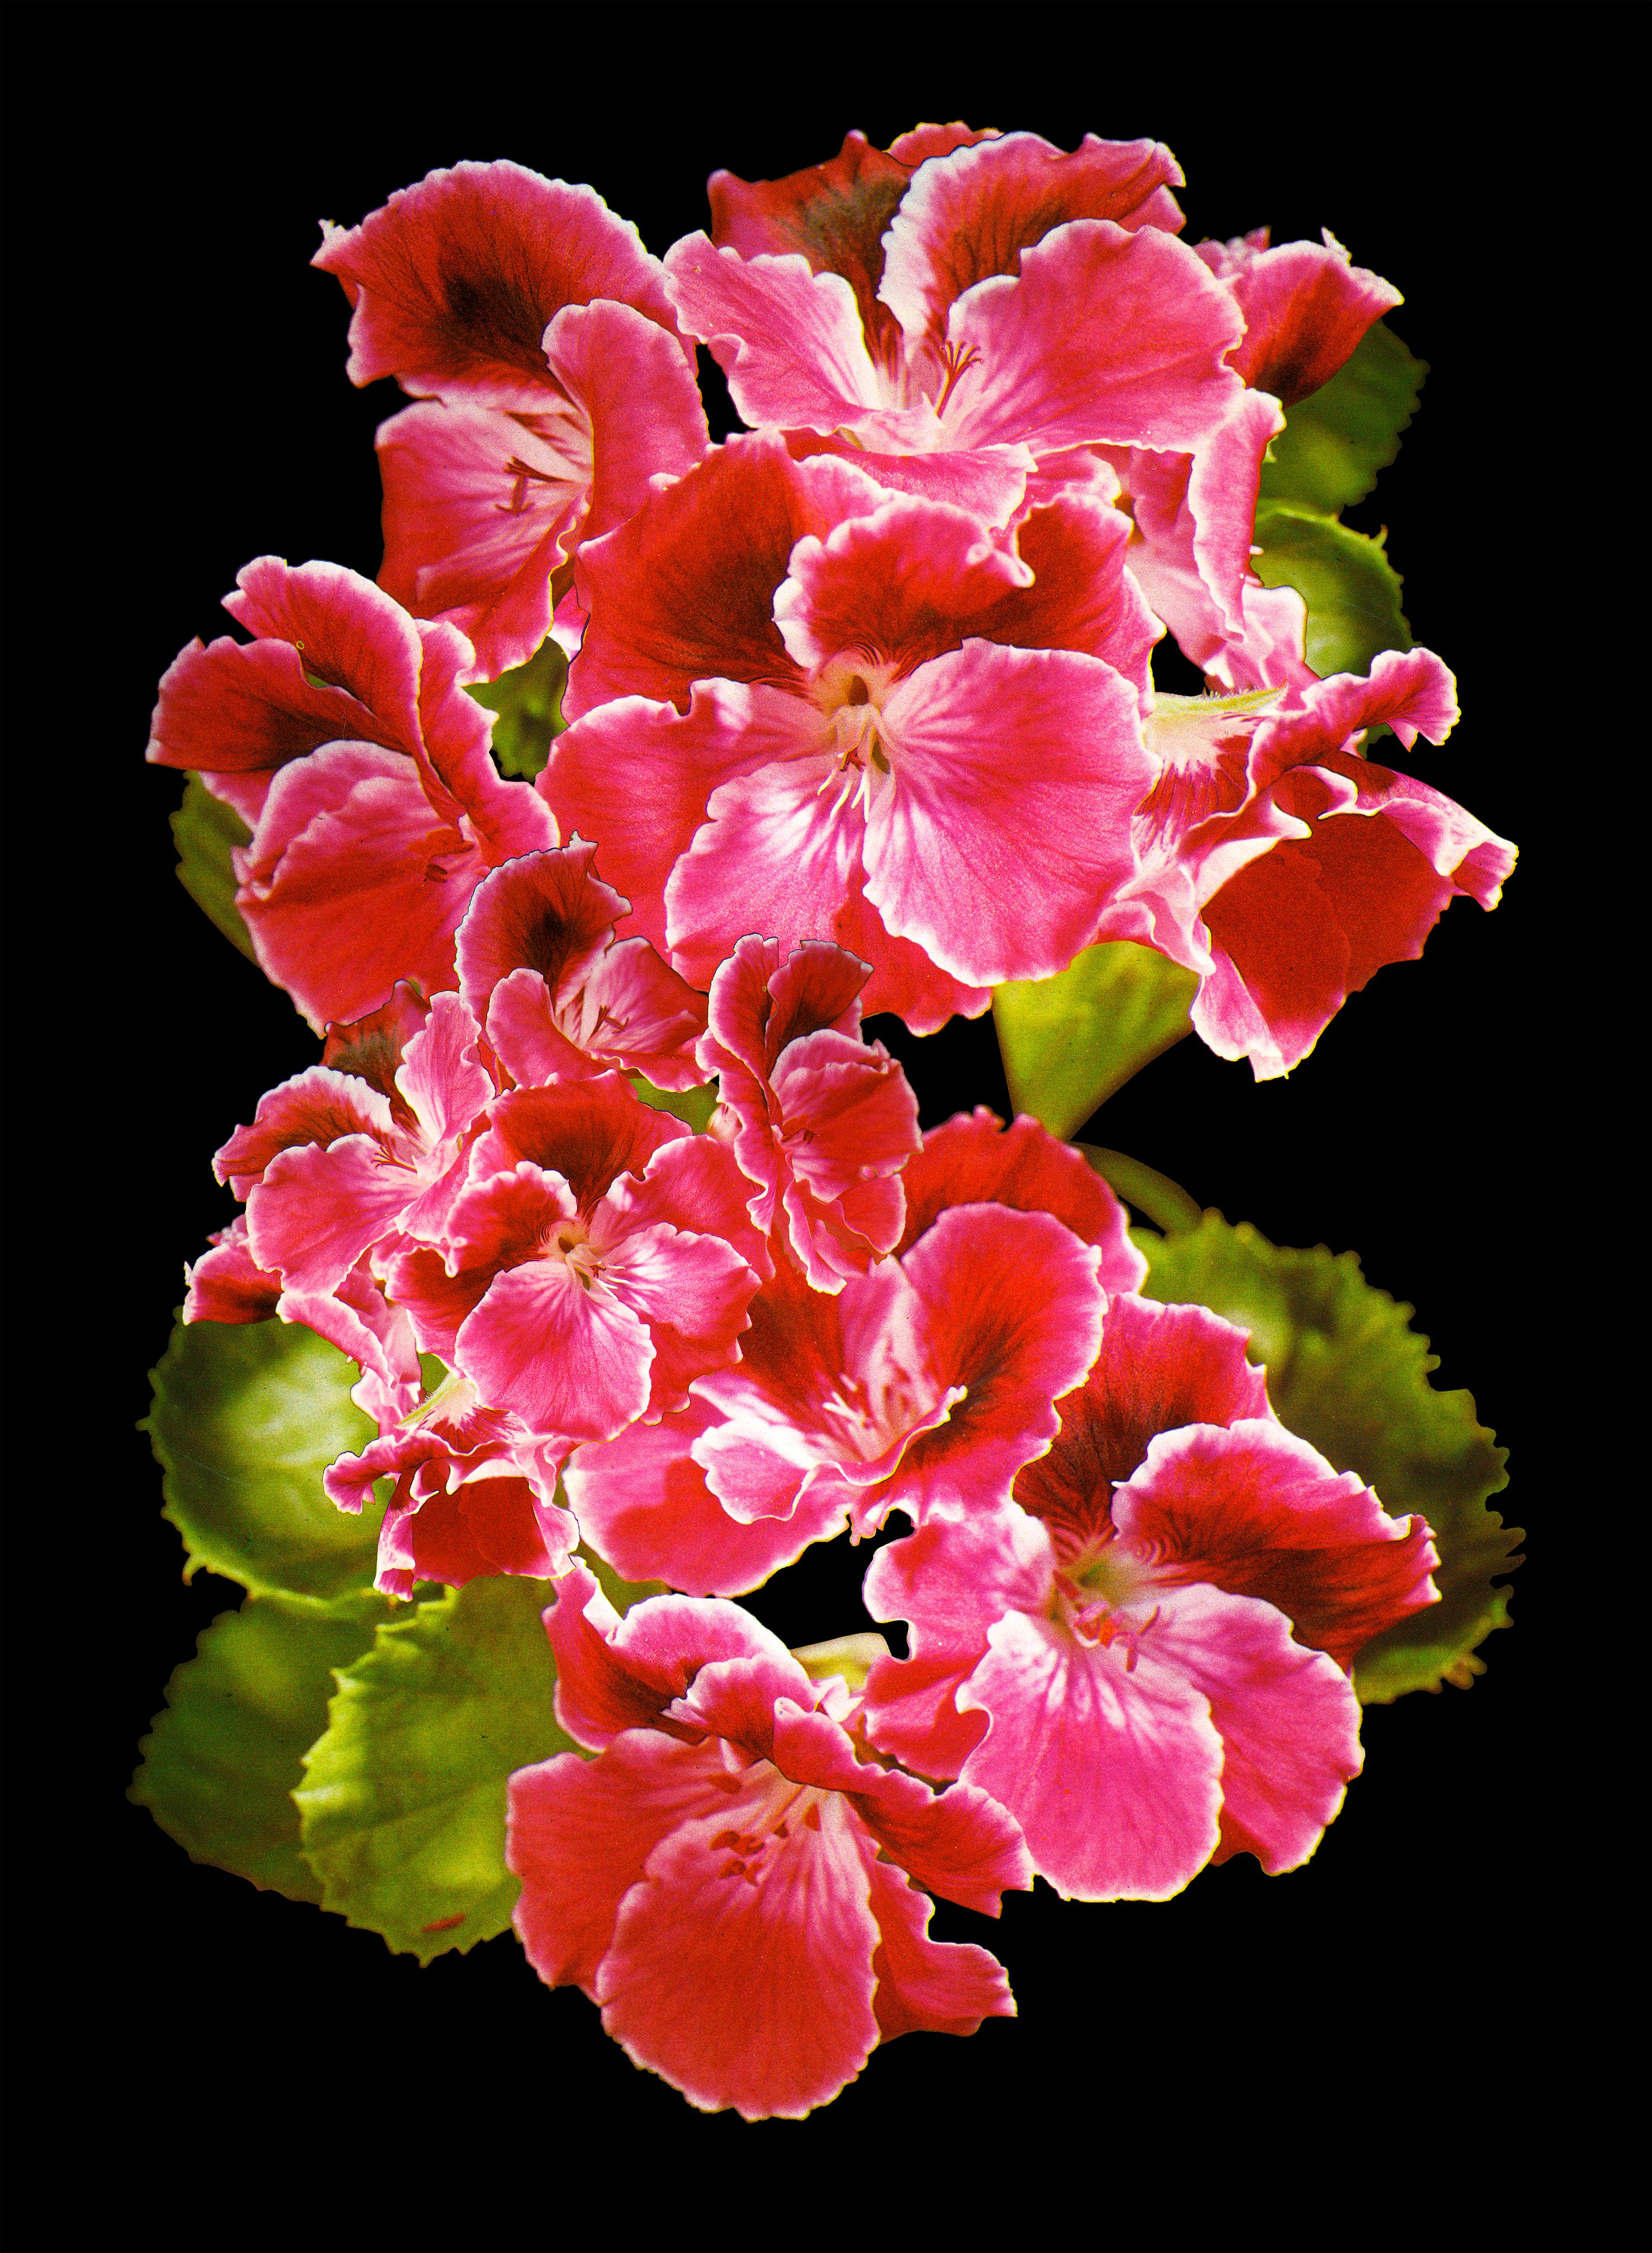 Big Pink (Black Background) - aerial photograph of vibrant flower (22 x 30) - Print by Laura Kay Keeling 